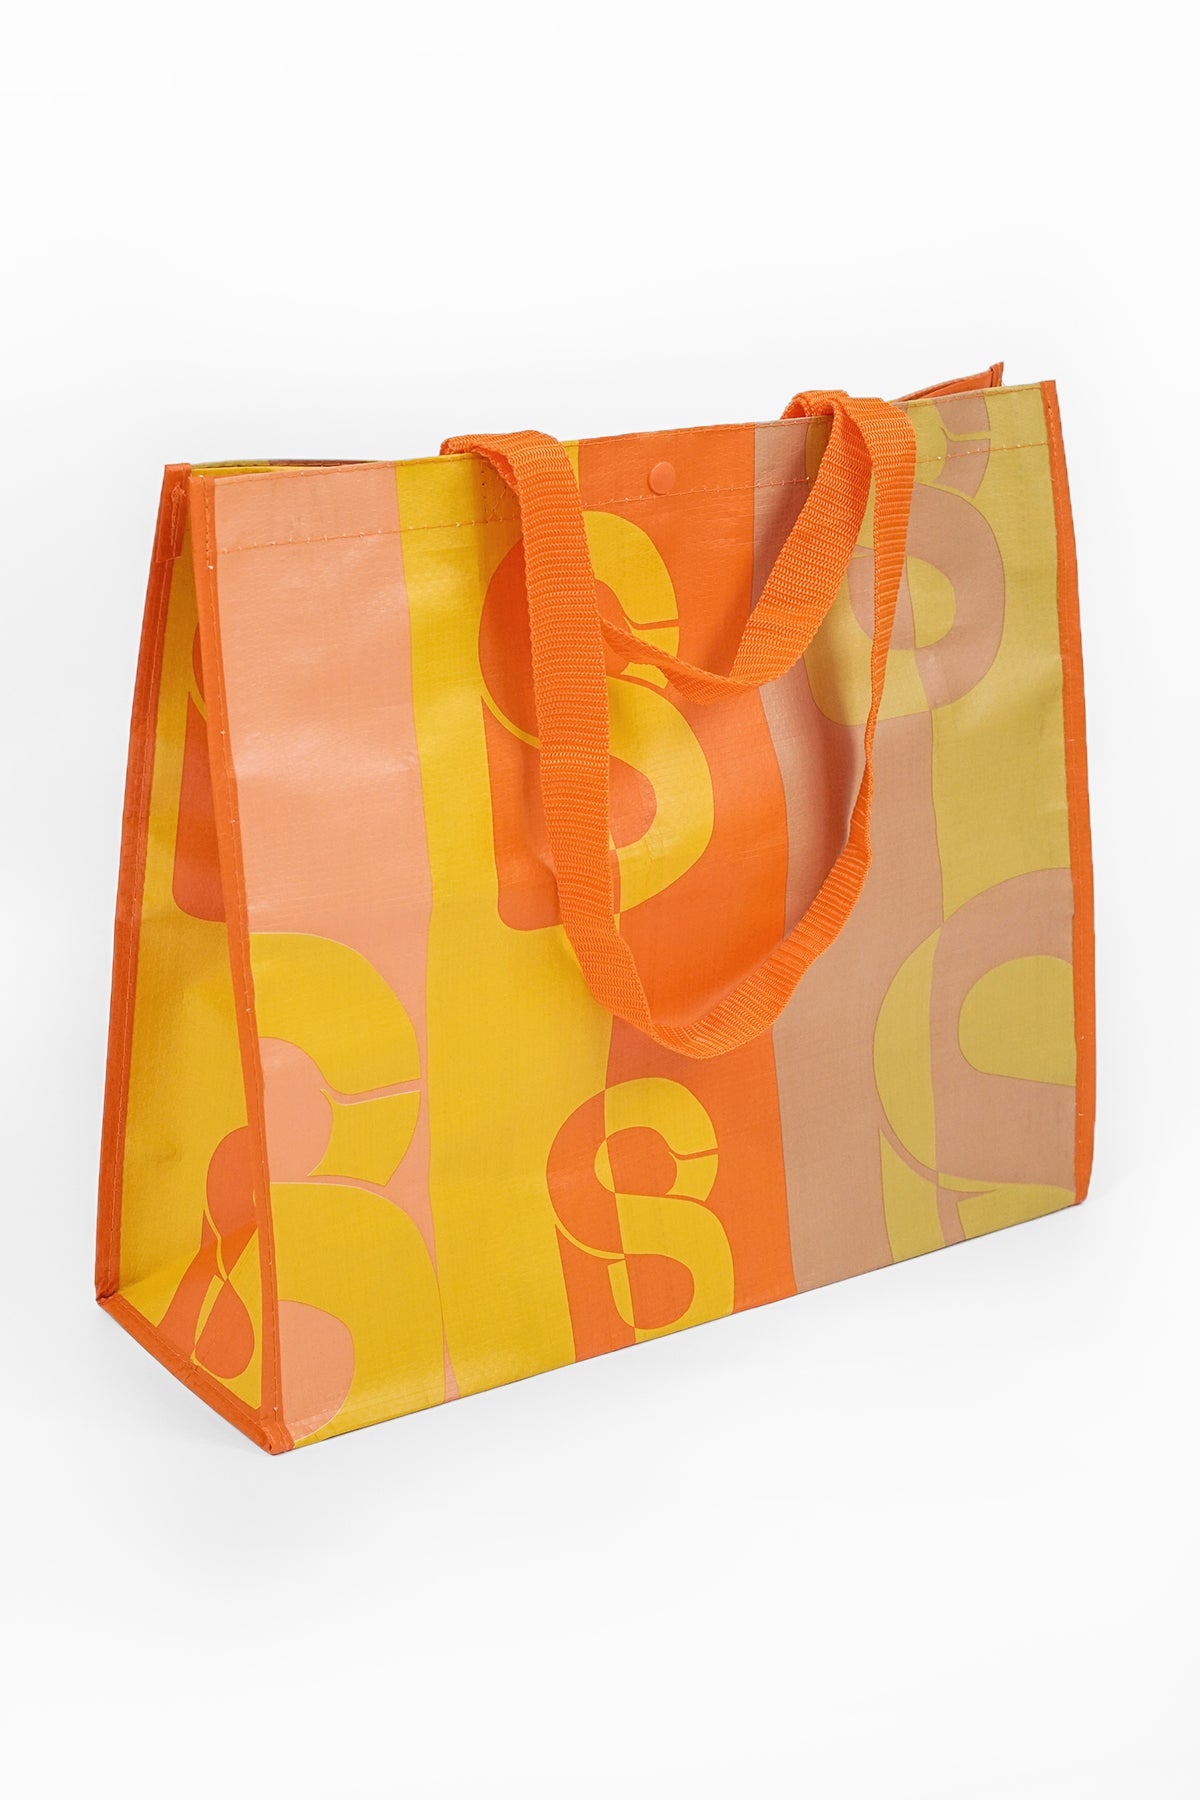 Today Shopping Bag – Buttonscarves